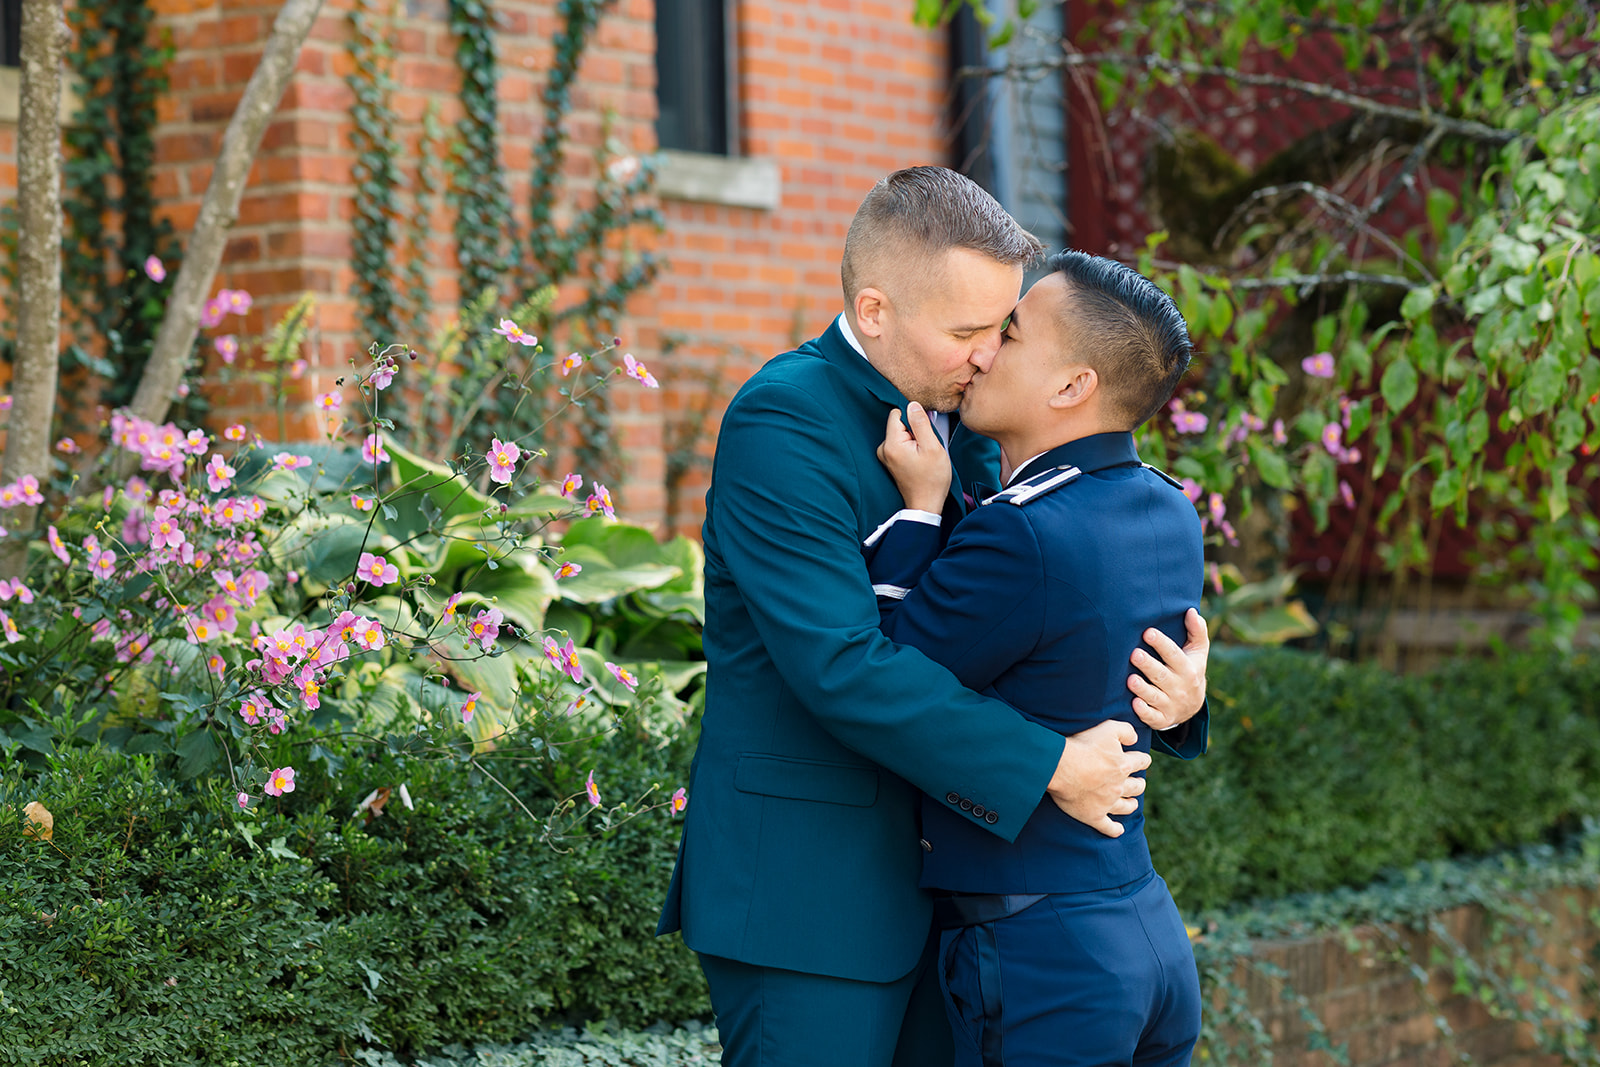 Two grooms passionately embrace and kiss just before their wedding